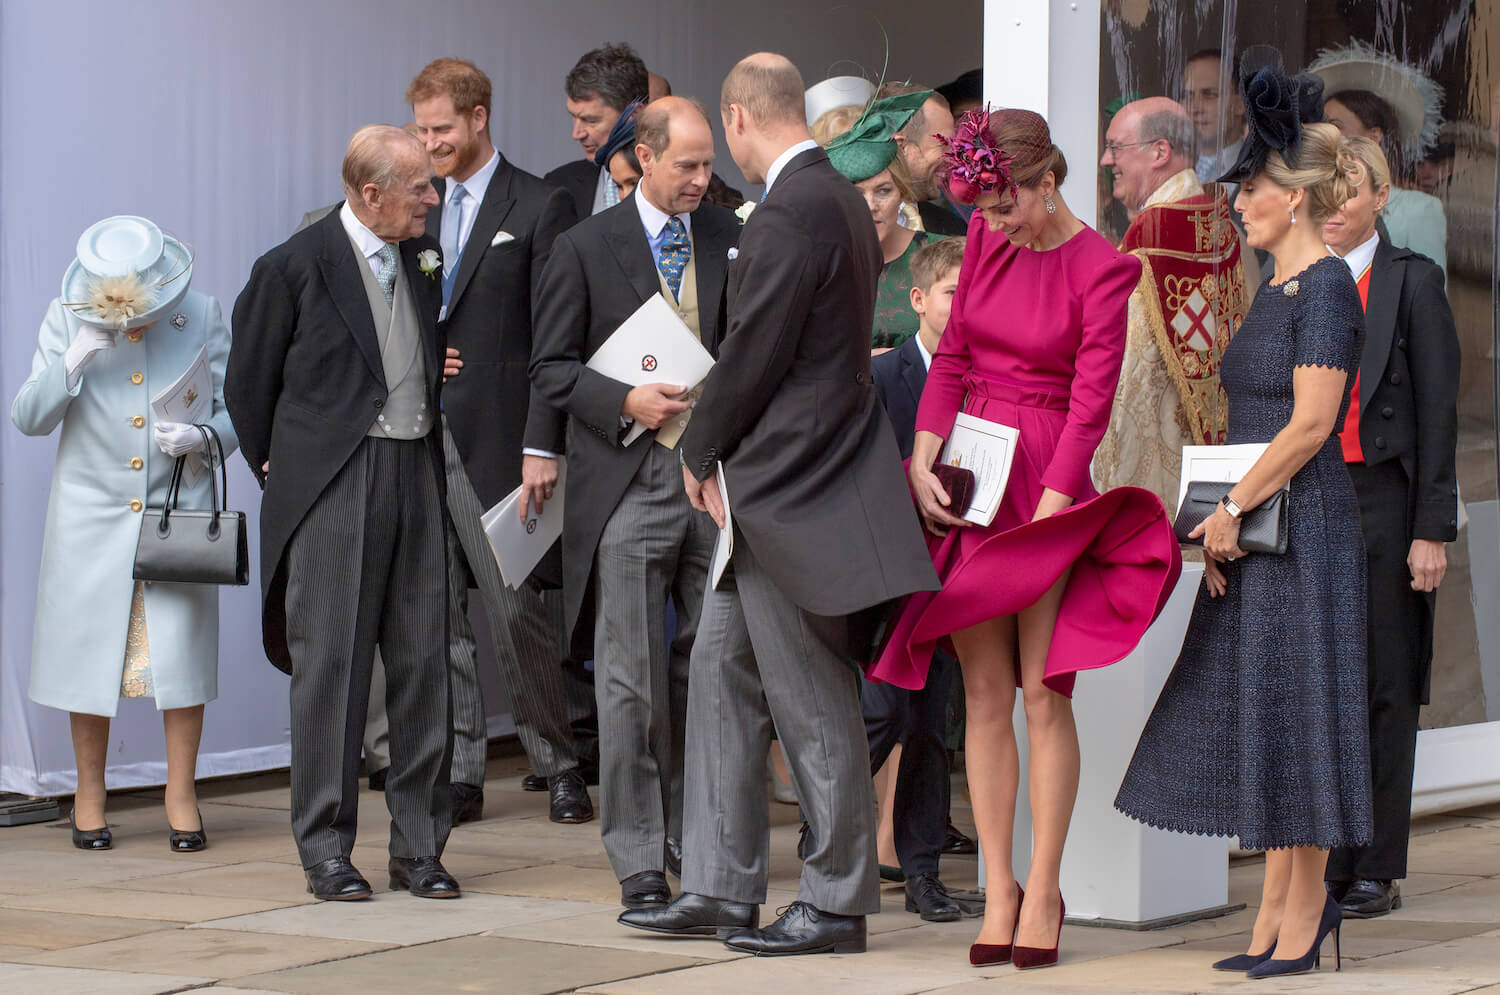 Kate Middleton almost suffers a wardrobe malfunction when her dress blows up in the wind